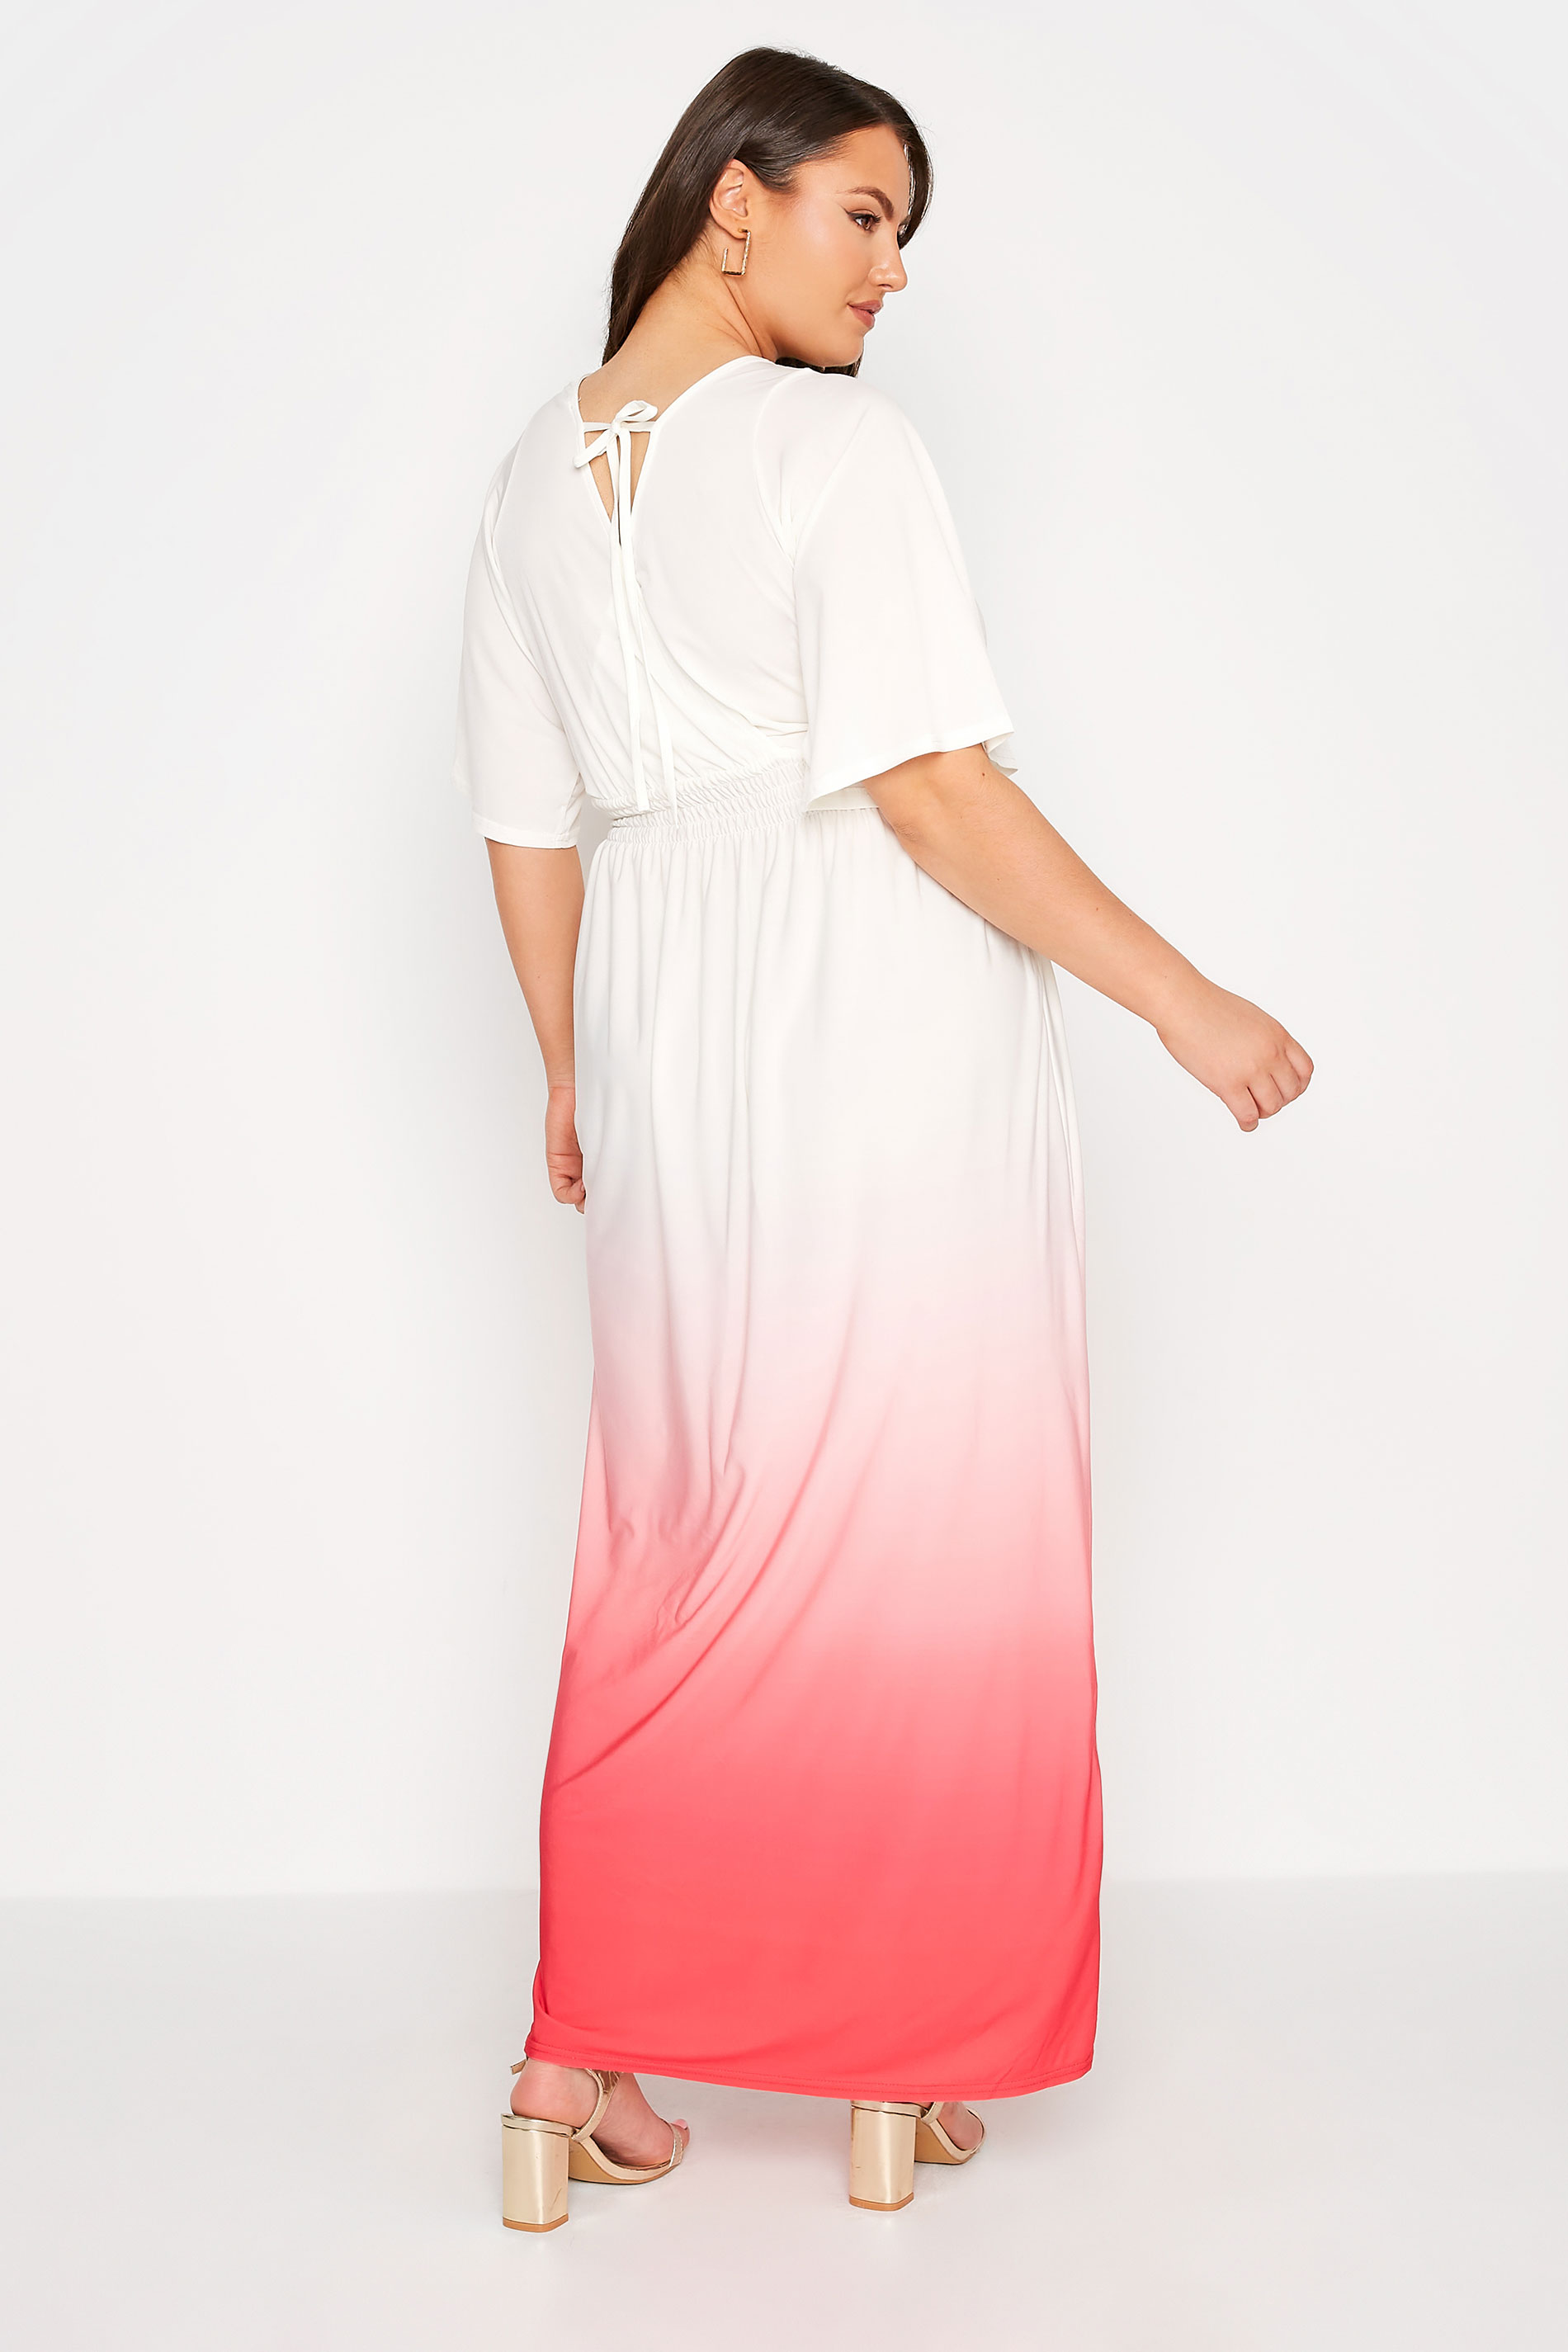 Robes Grande Taille Grande taille  Robes Longues | YOURS LONDON - Robe Blanche Maxi Ombré Rose - FE73842